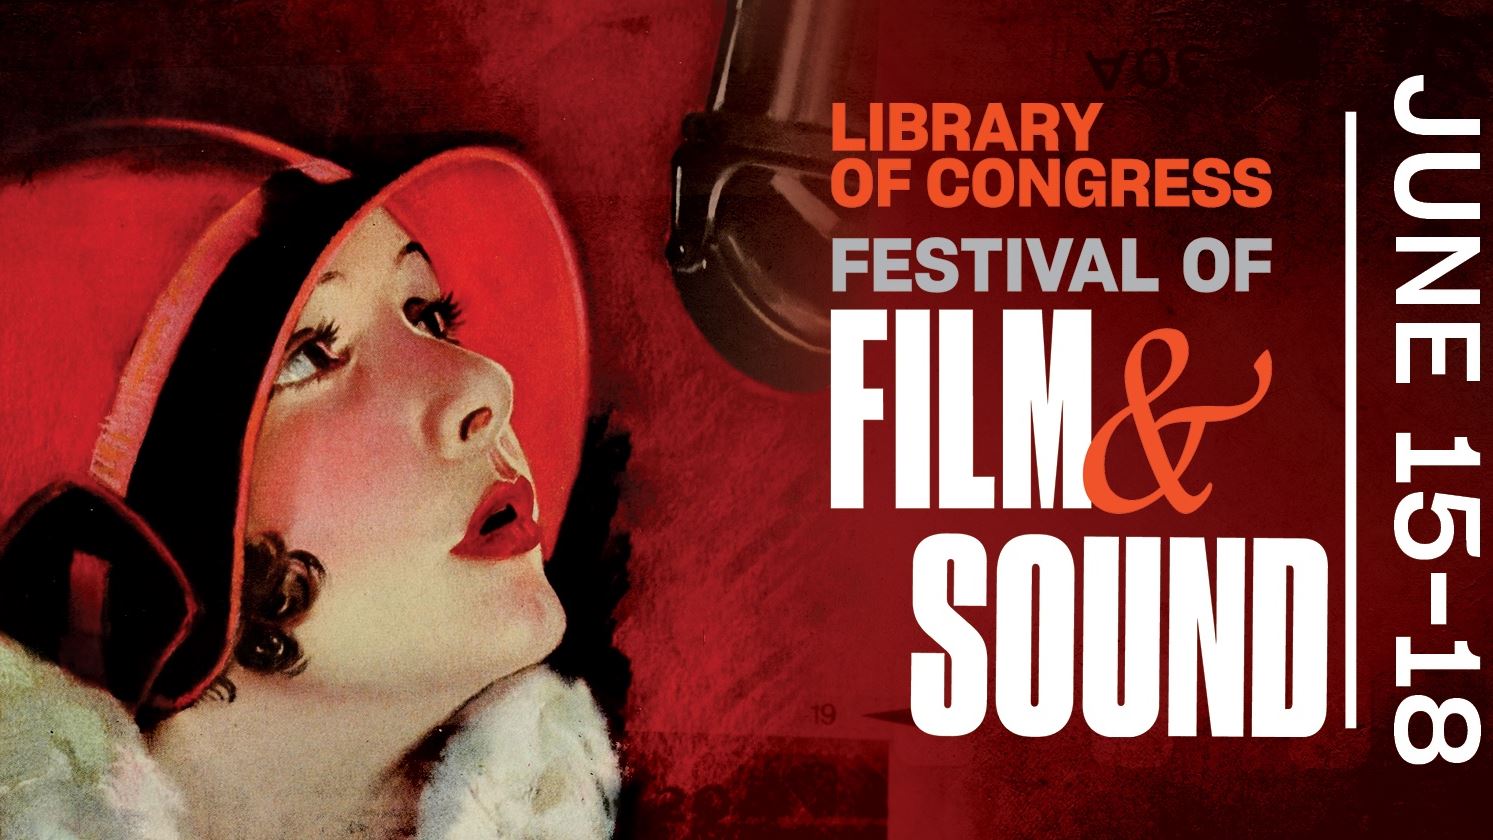 Inaugural Library of Congress Film and Sound Festival Set to Gather Film Fans, Archivists and Authors in Celebration of Rare Silent and Sound Cinema